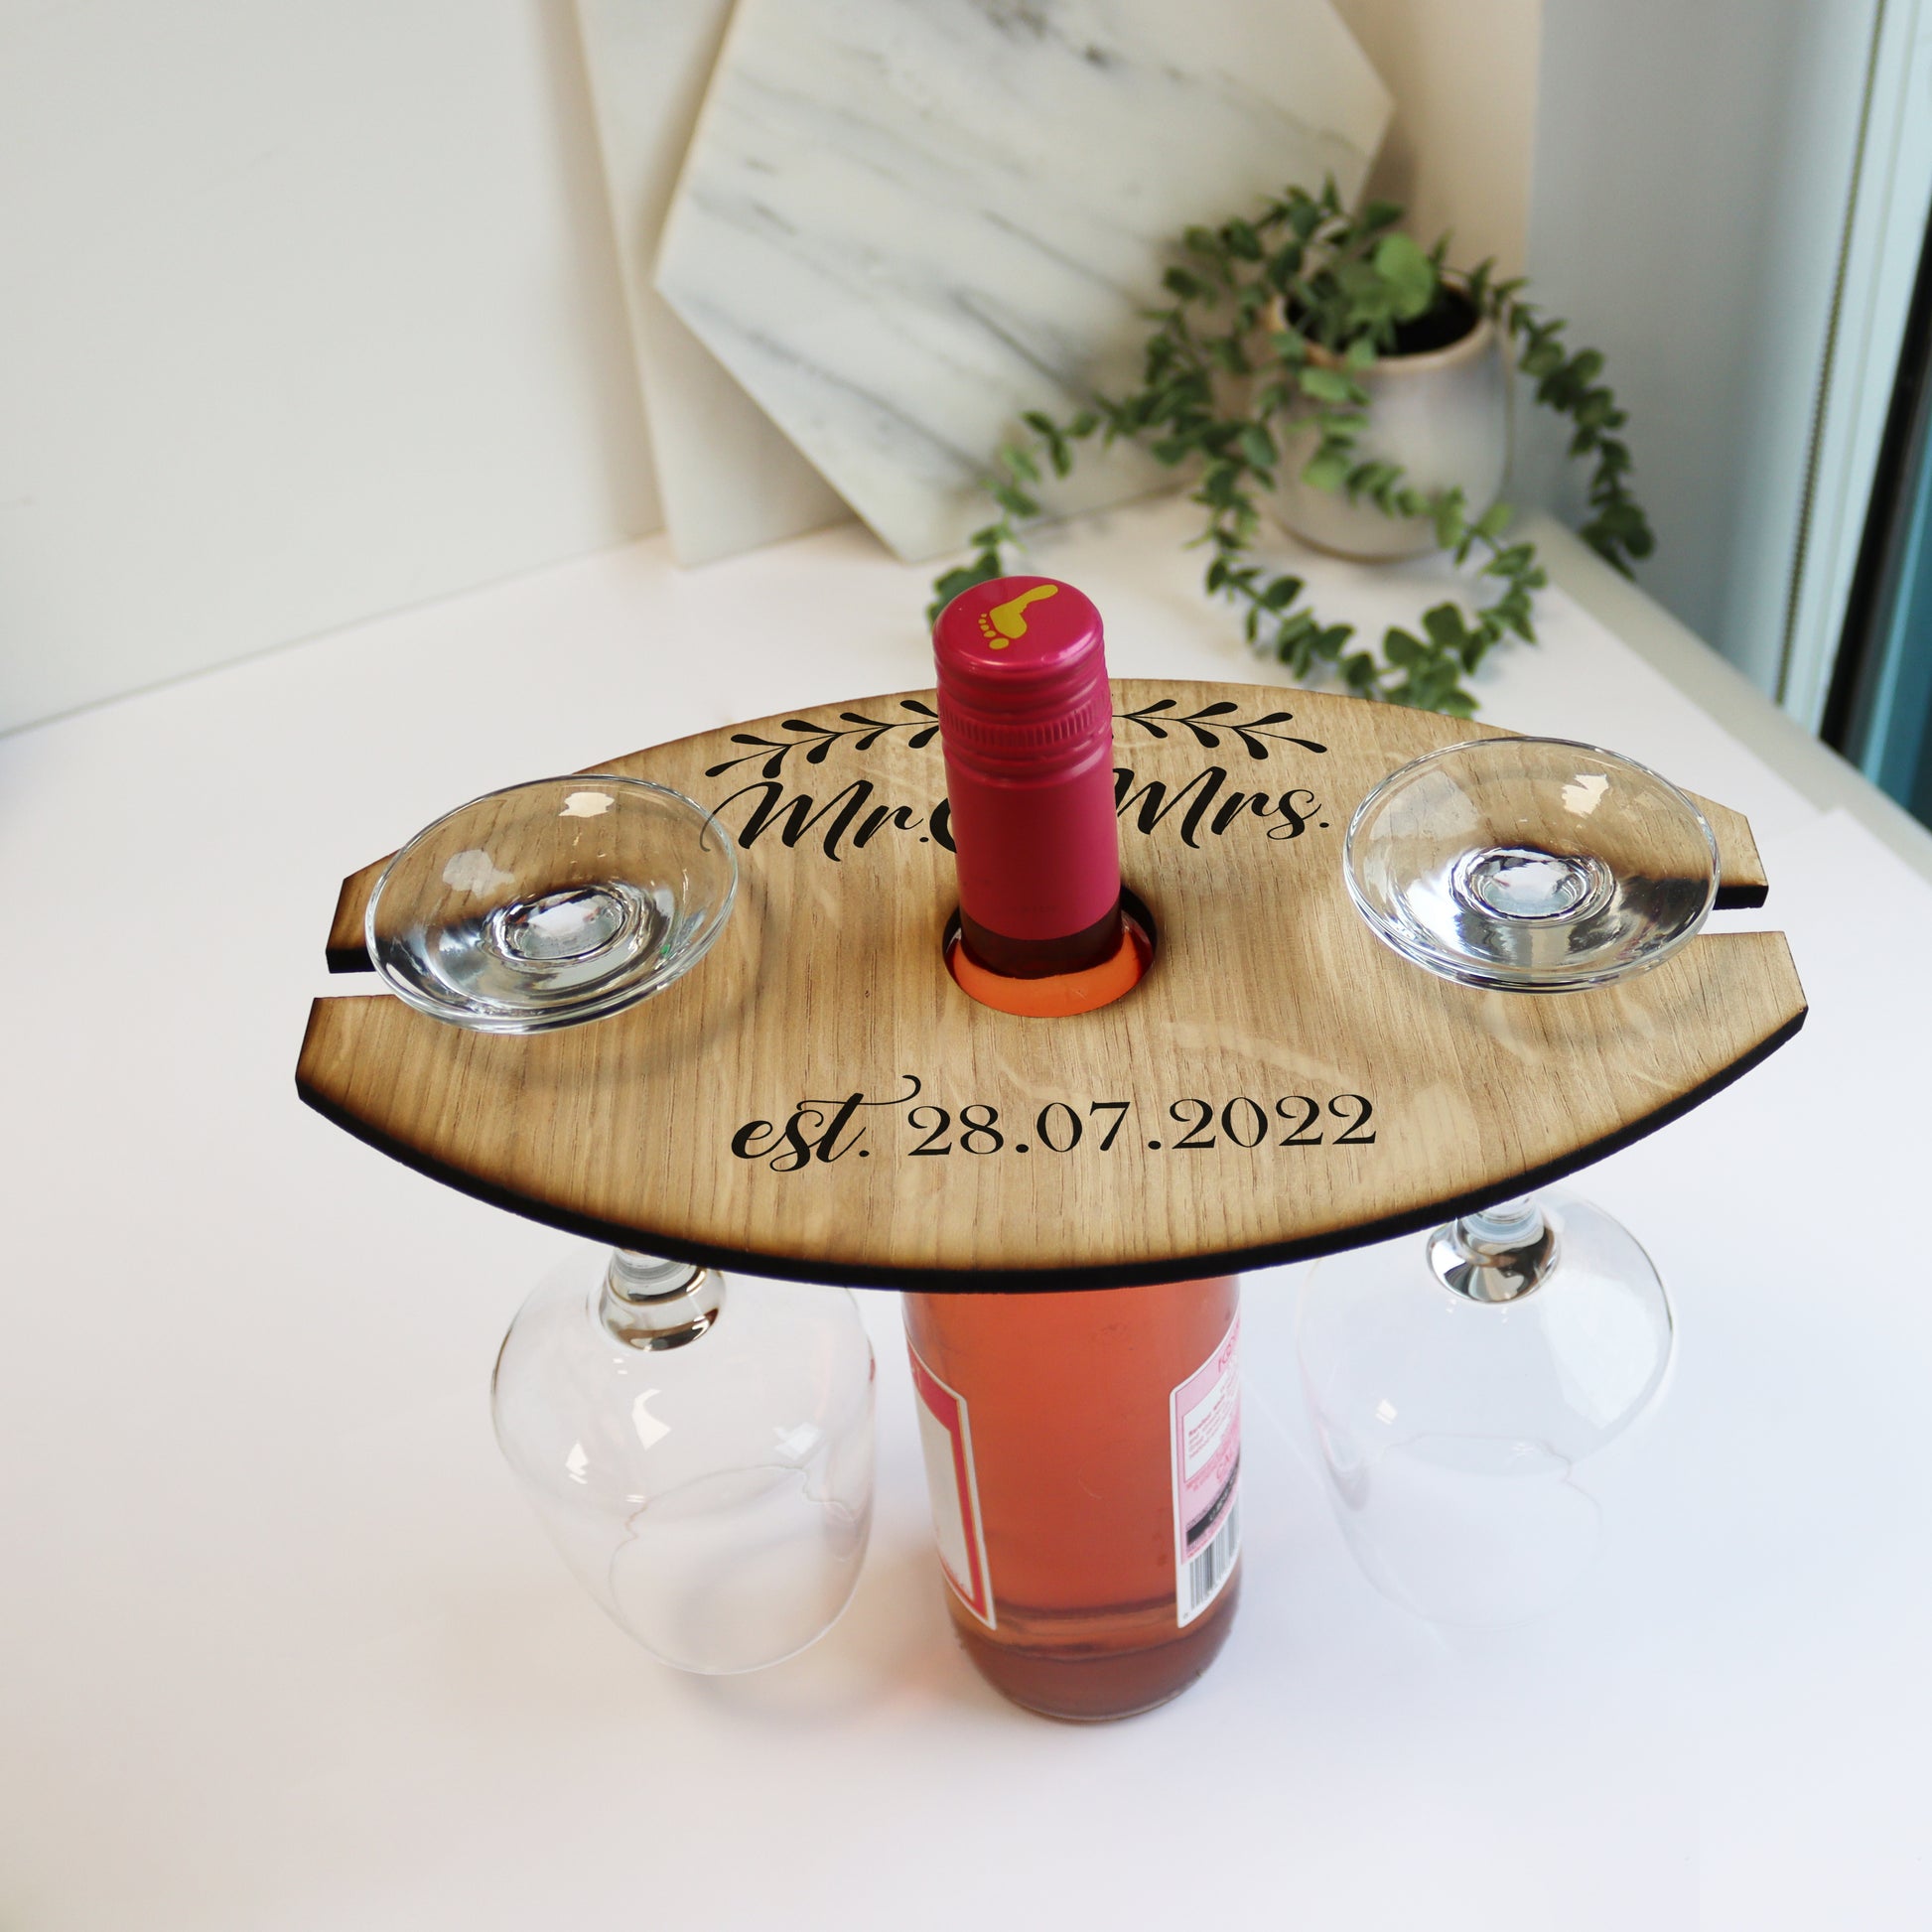 personalised wooden wine butler for wine bottle and wine glasses wooden 5th wedding anniversary gift